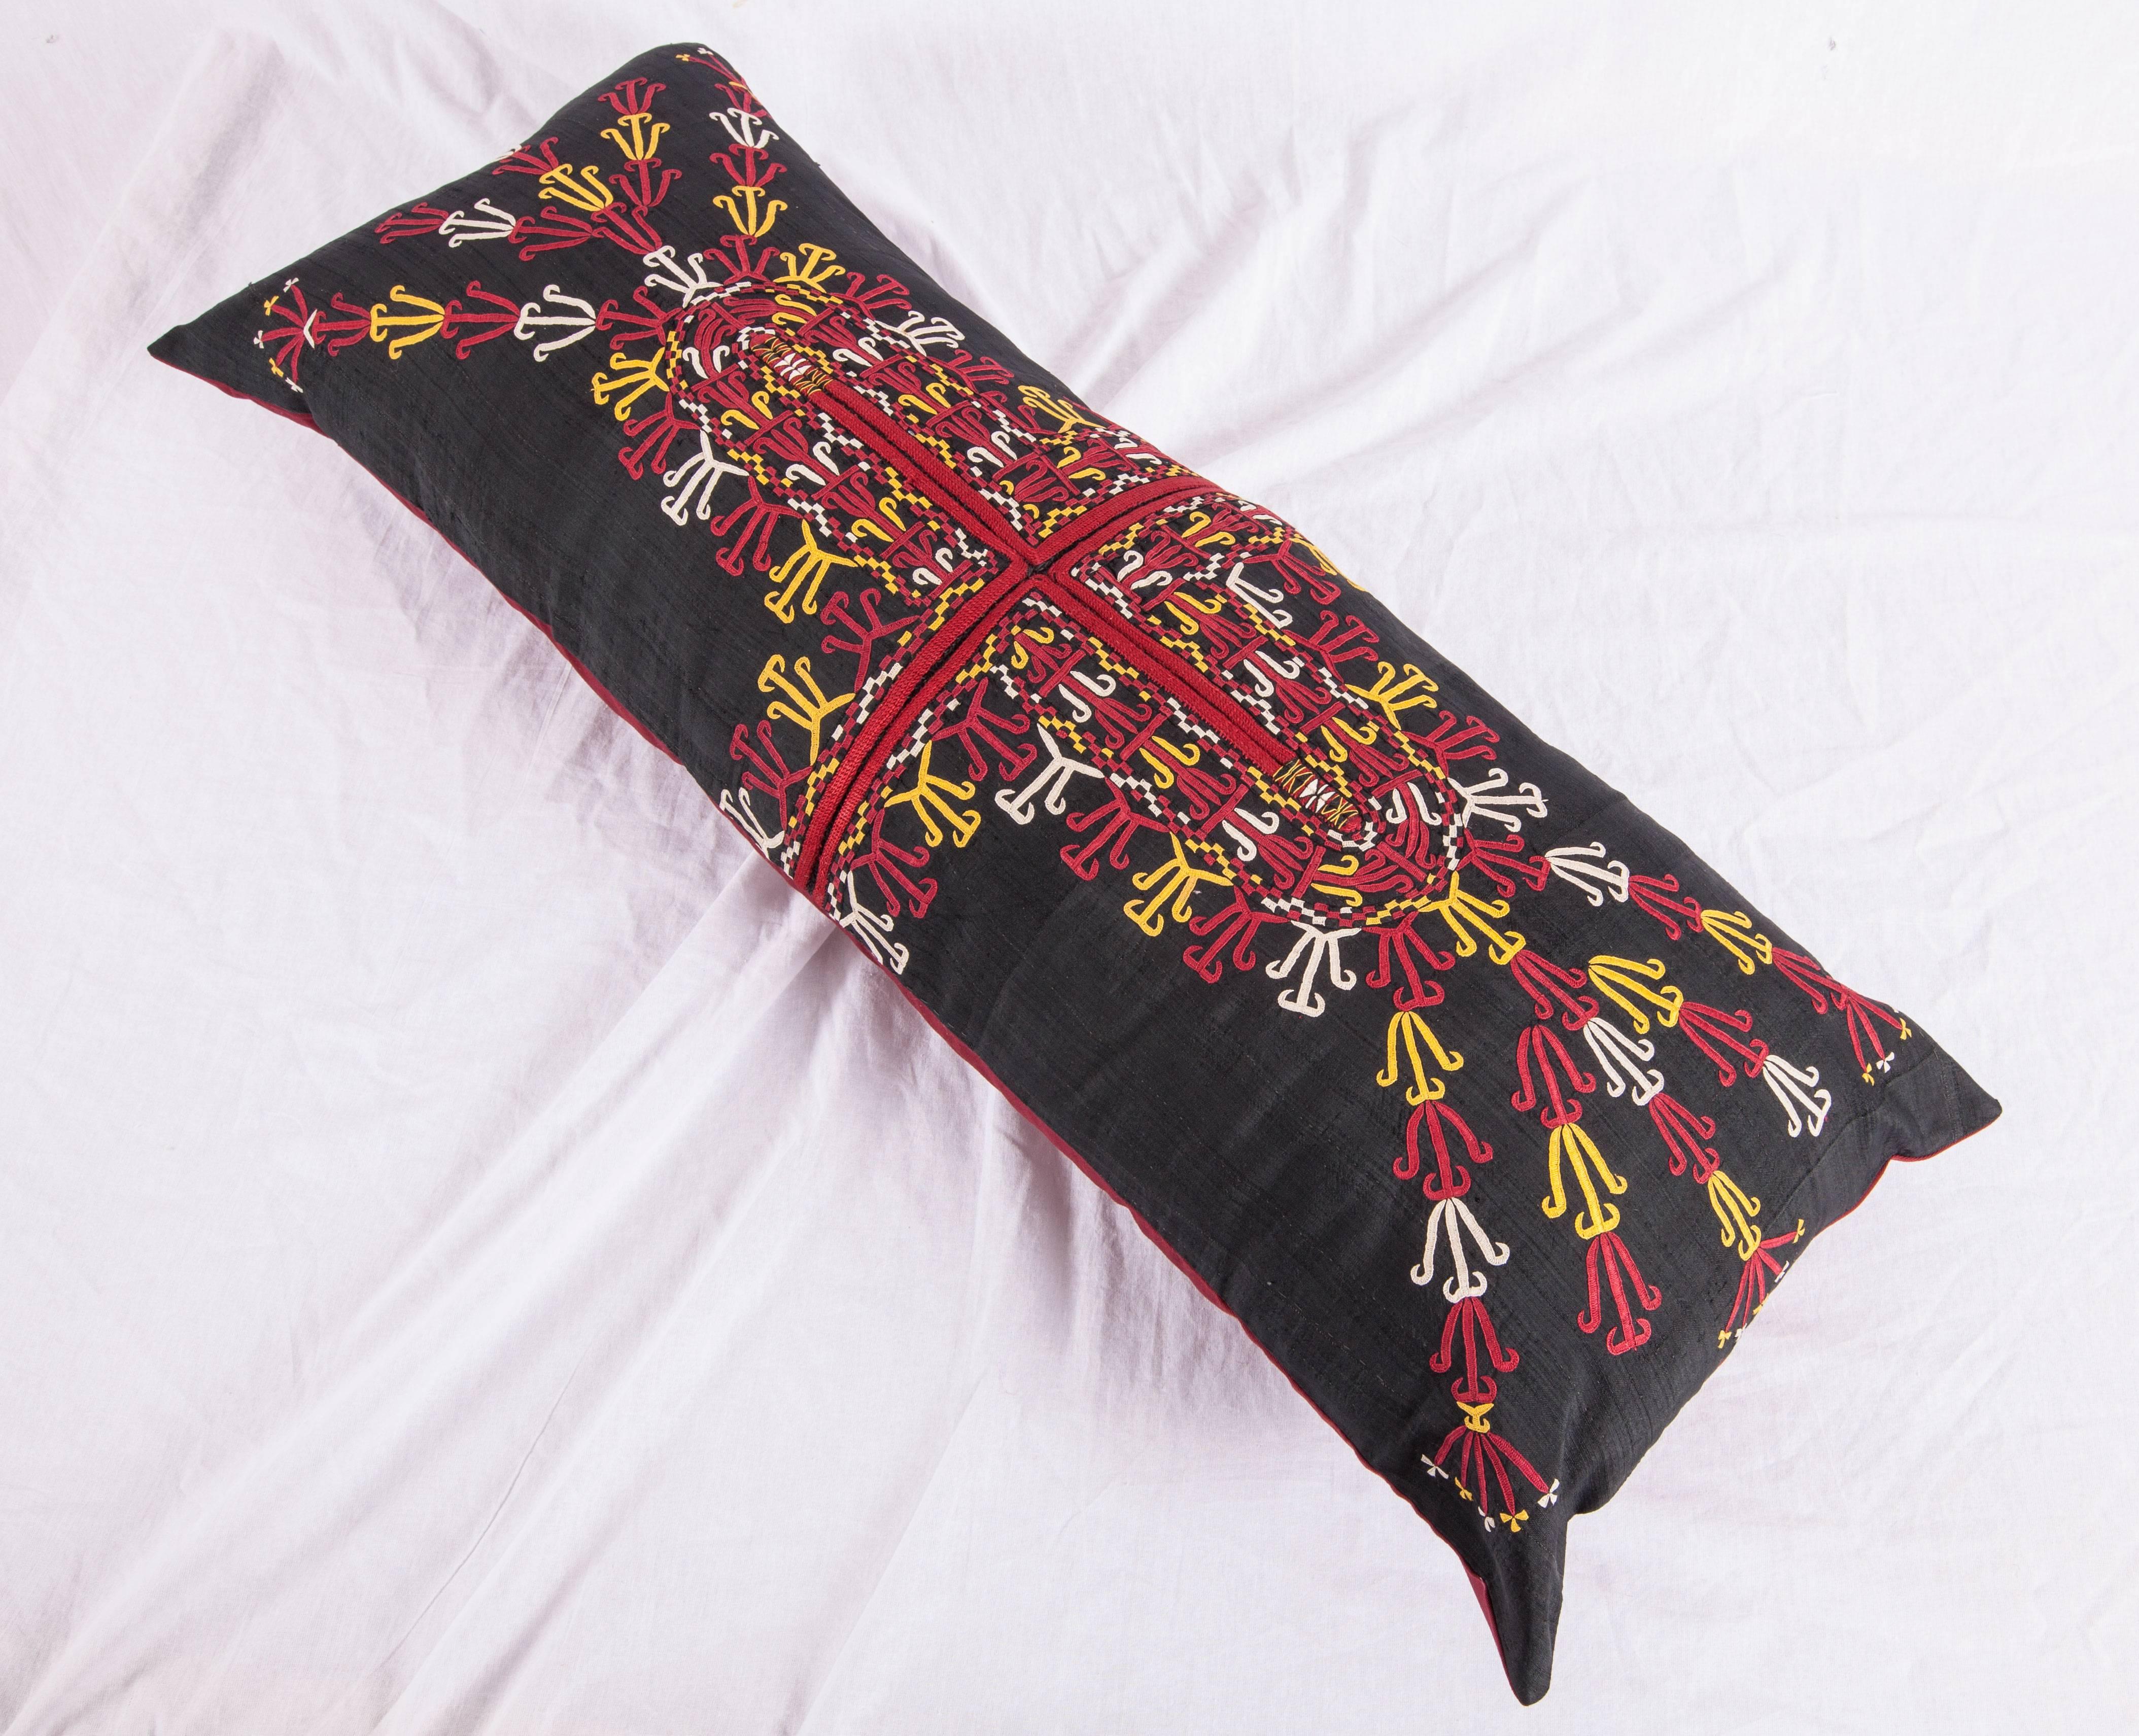 Embroidered Pillow Case Fashioned from a Early 20th Century Turkmen Emroidered Silk Coat